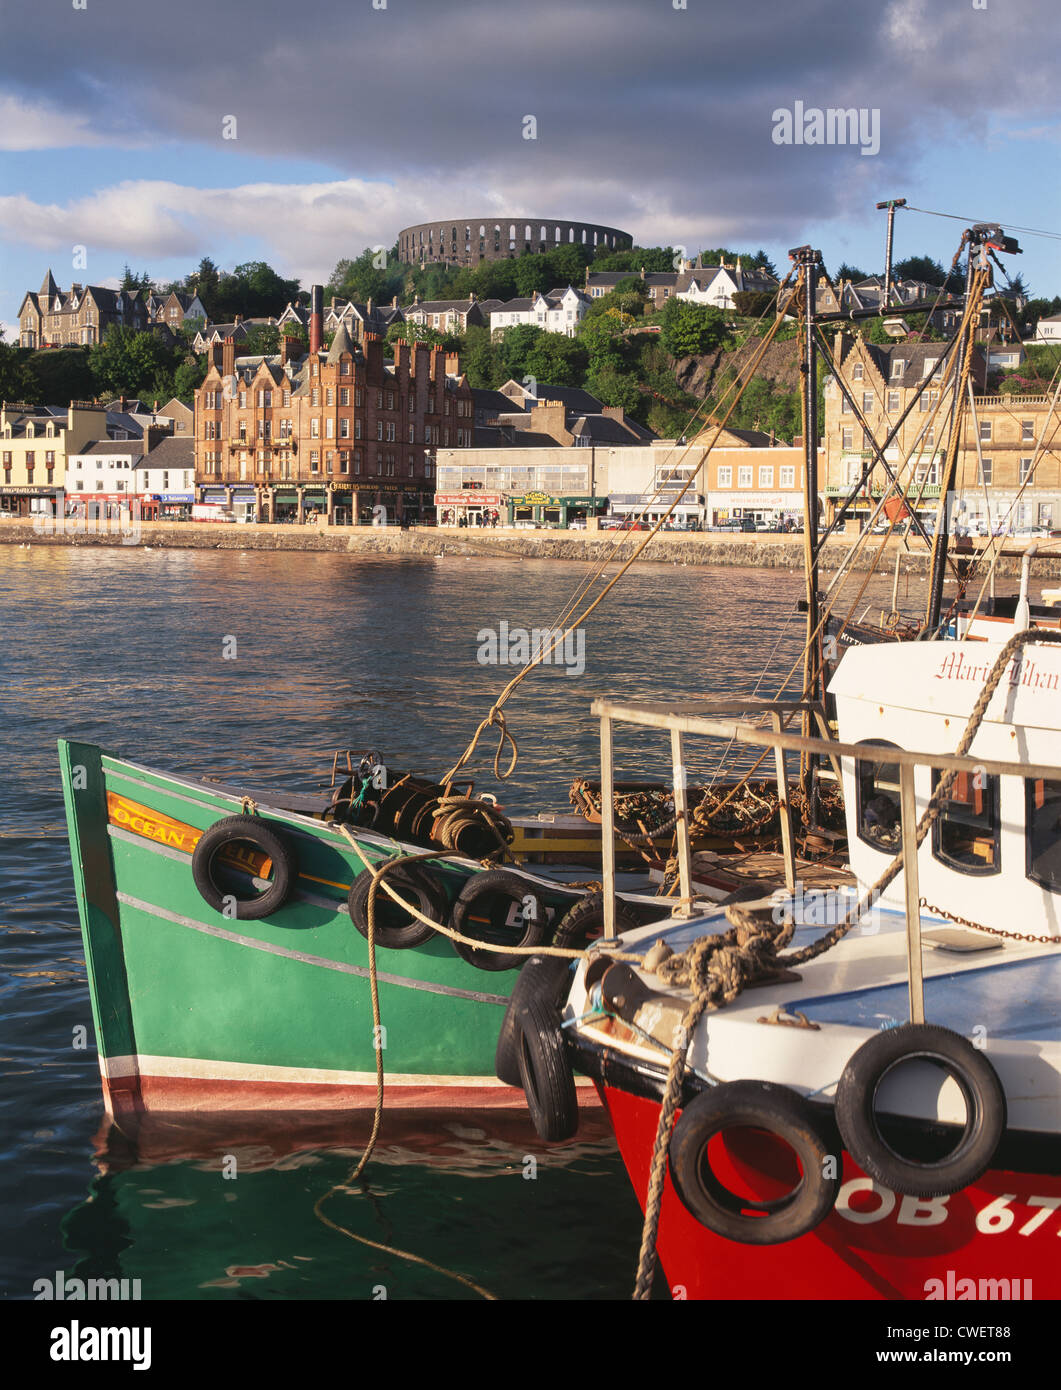 Oban harbour, Argyll and Bute, Scotland, UK. McCaig's Tower is prominent on the skyline. Stock Photo